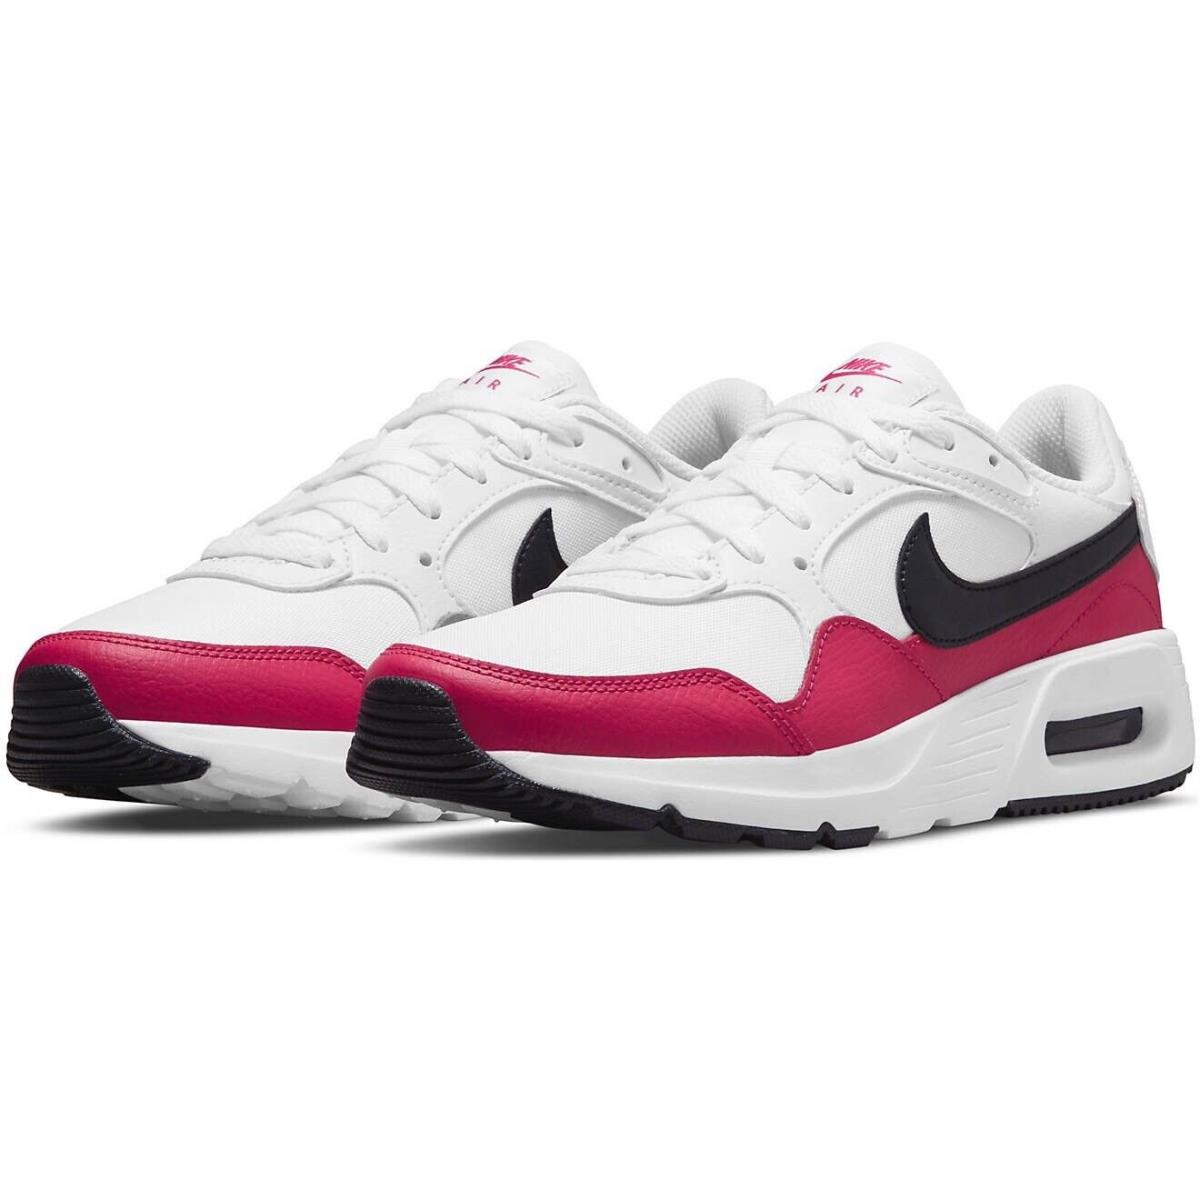 Wmns Nike Air Max SC Women`s Shoe CW4554 106 Size 11 US with Box